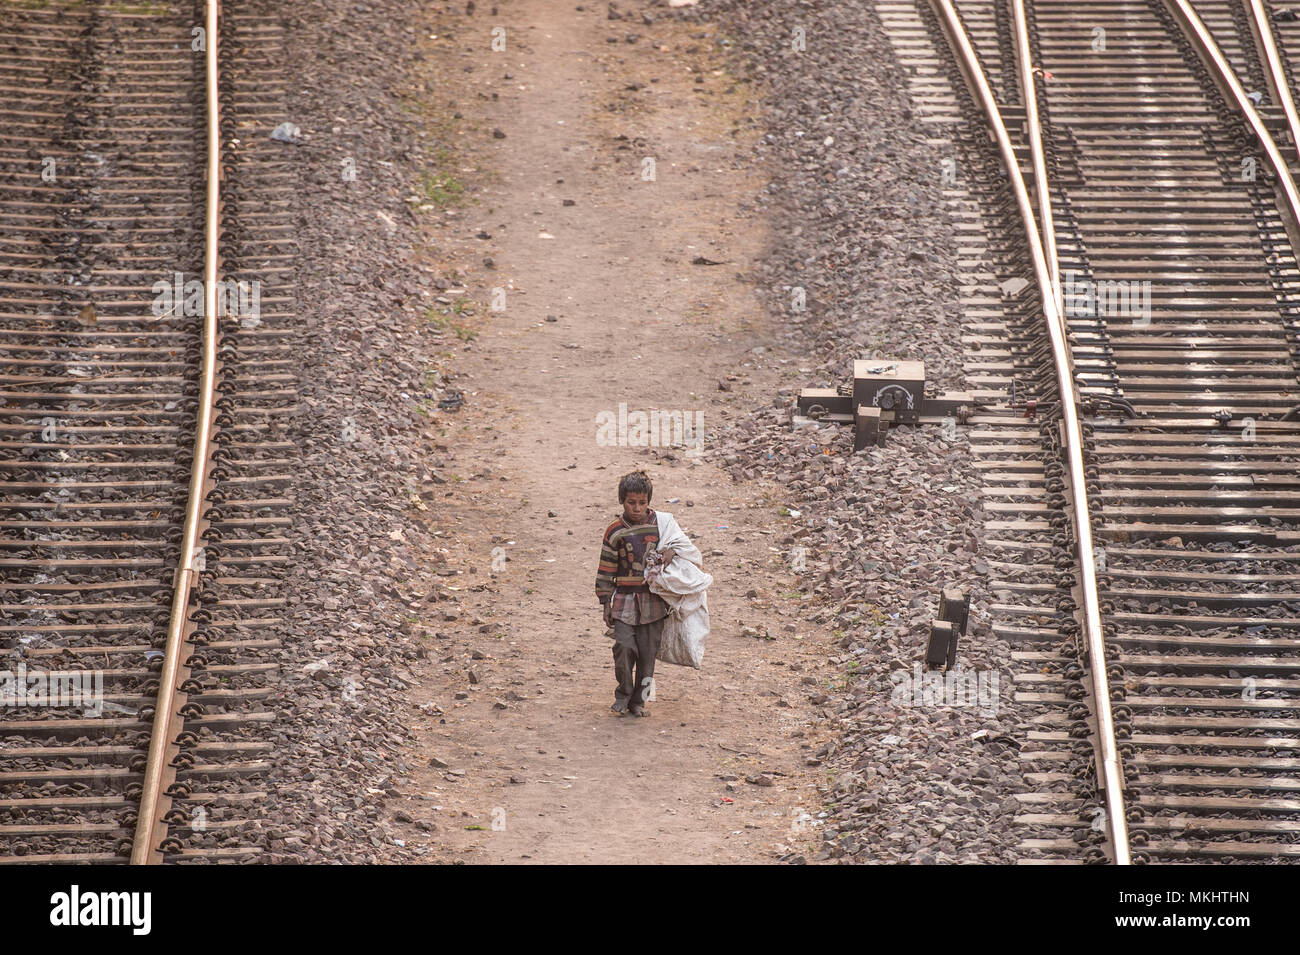 NEW DELHI - INDIA - 14 DECEMBER 2017. A poor child is walking through the railroads looking for something to eat and plastic bottles to recycle. Stock Photo